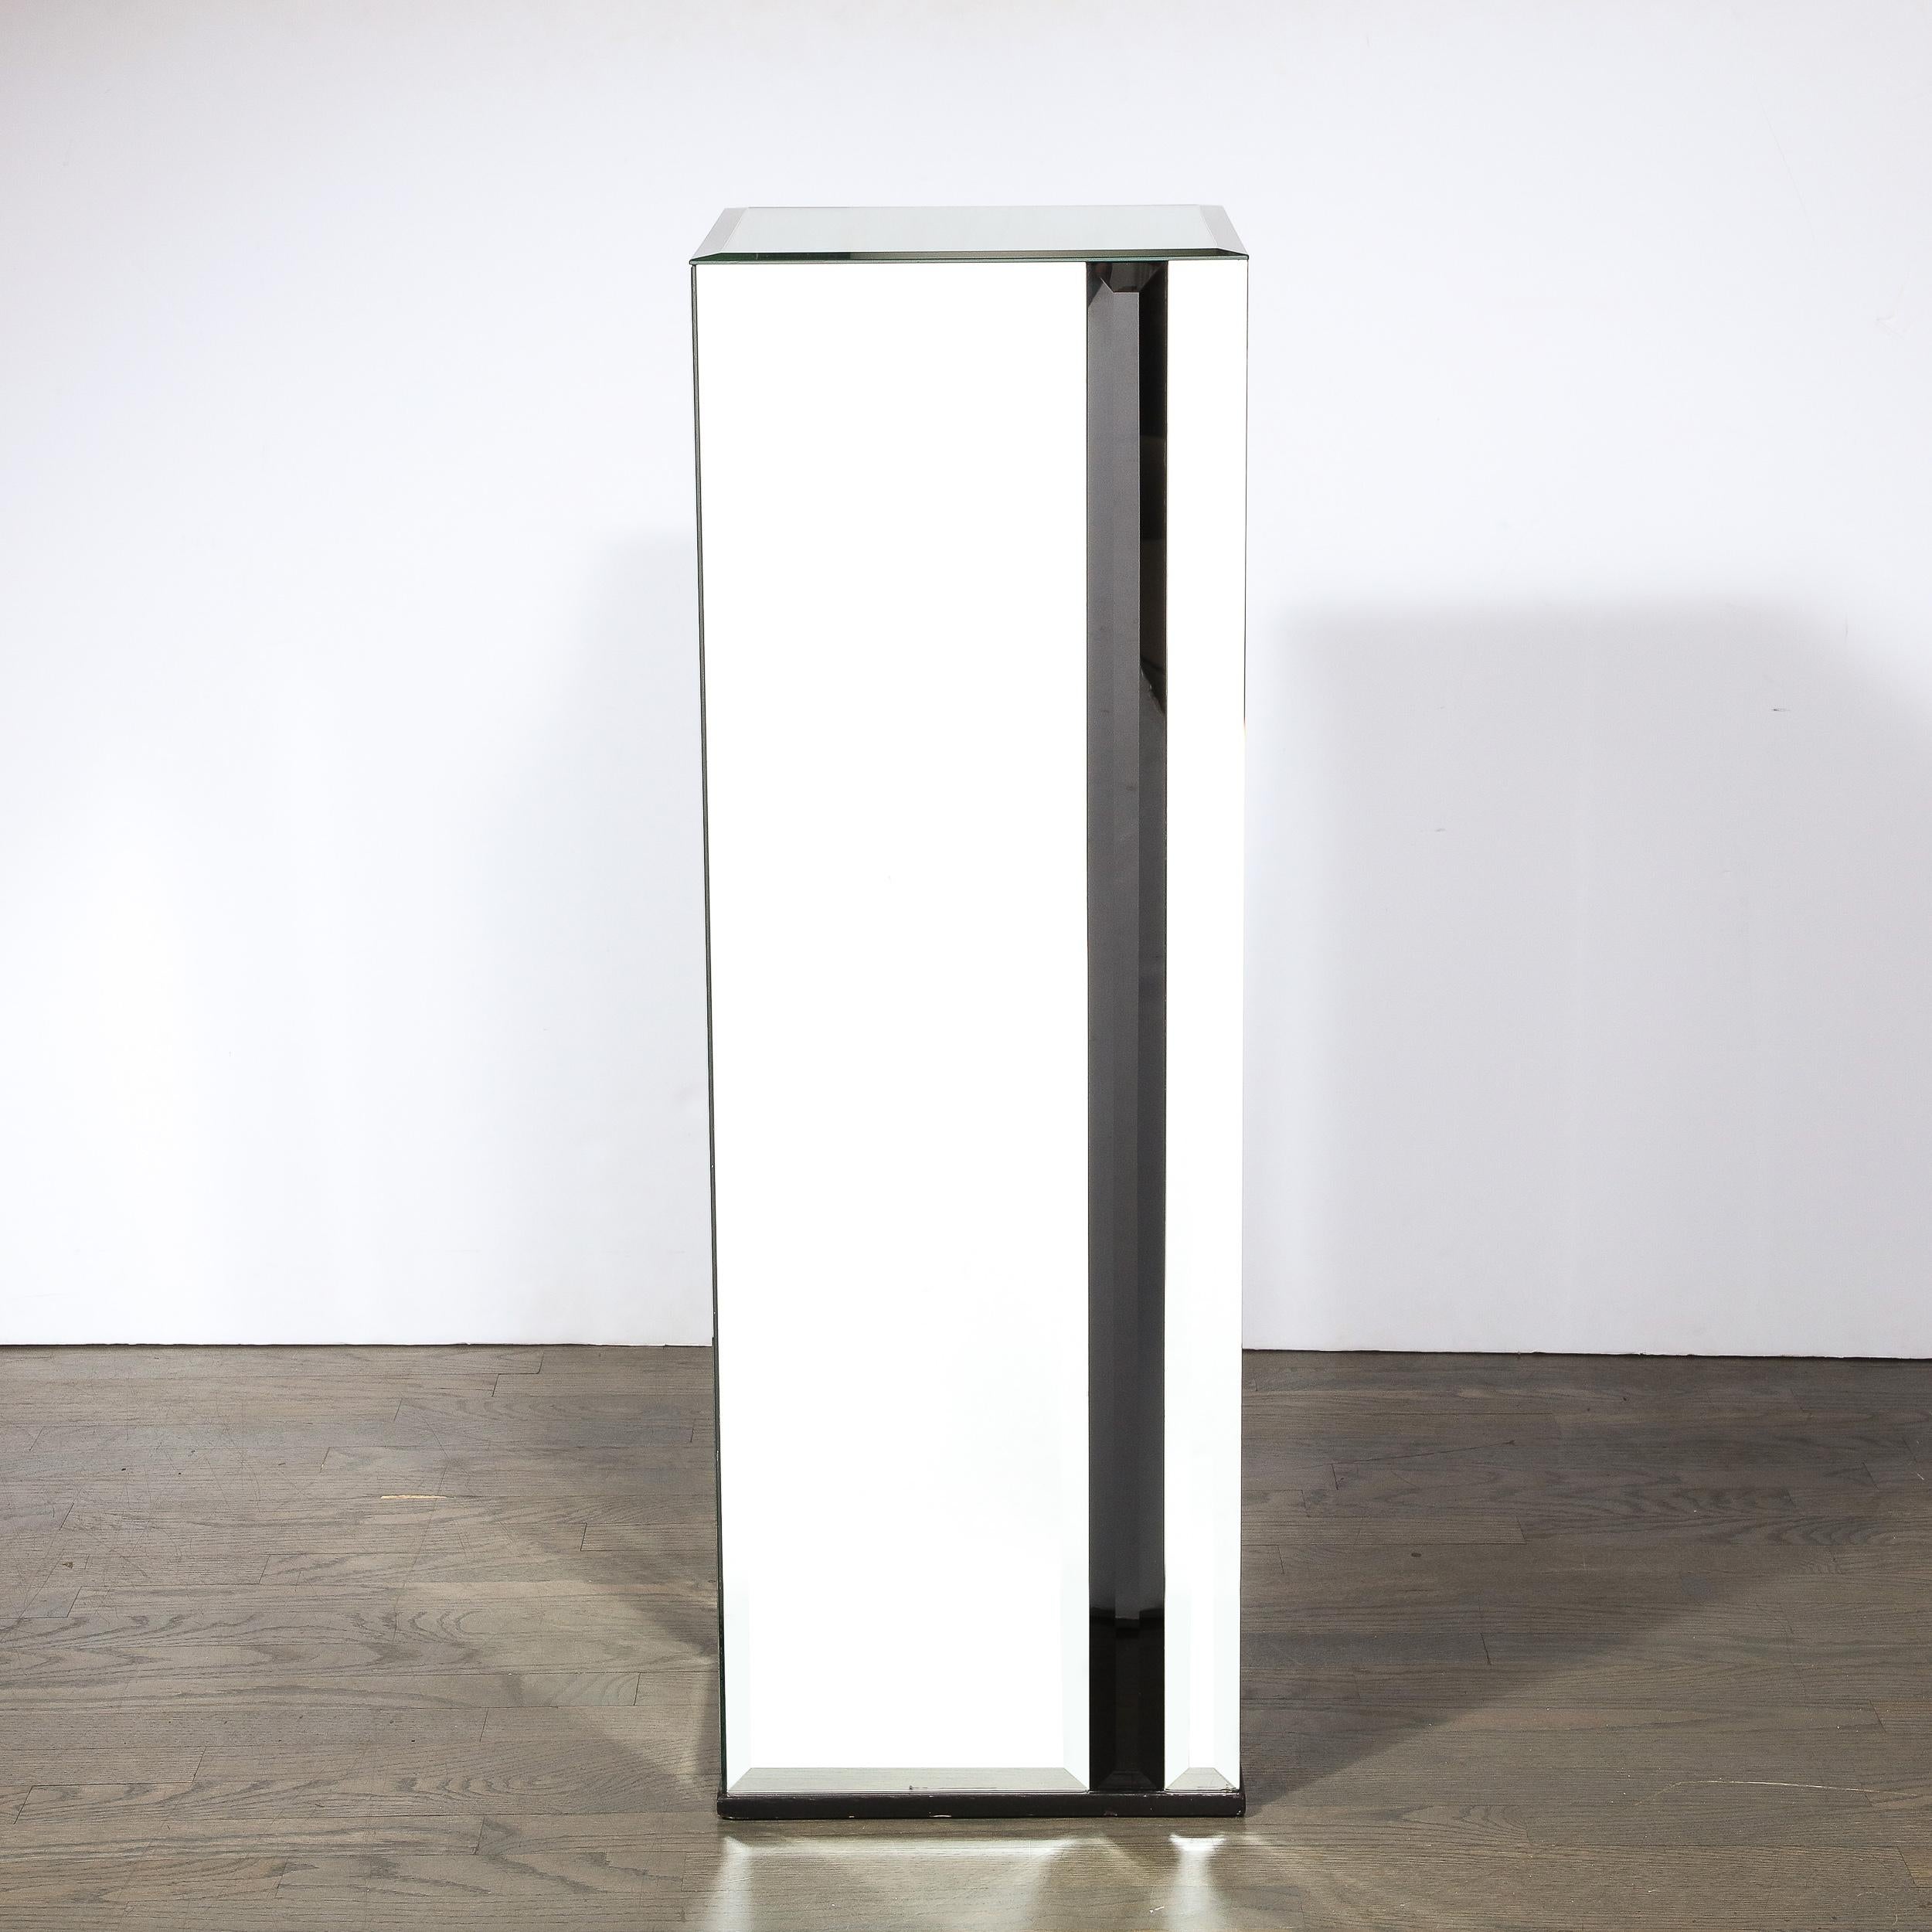 This stunning and sophisticated Mid-Century Modern pedestal was realized in the United States circa 1970. It offers a rectangular volumetric body composed of mirrored glass segments. Each side offers a larger rectangular mirrored panel with a thin